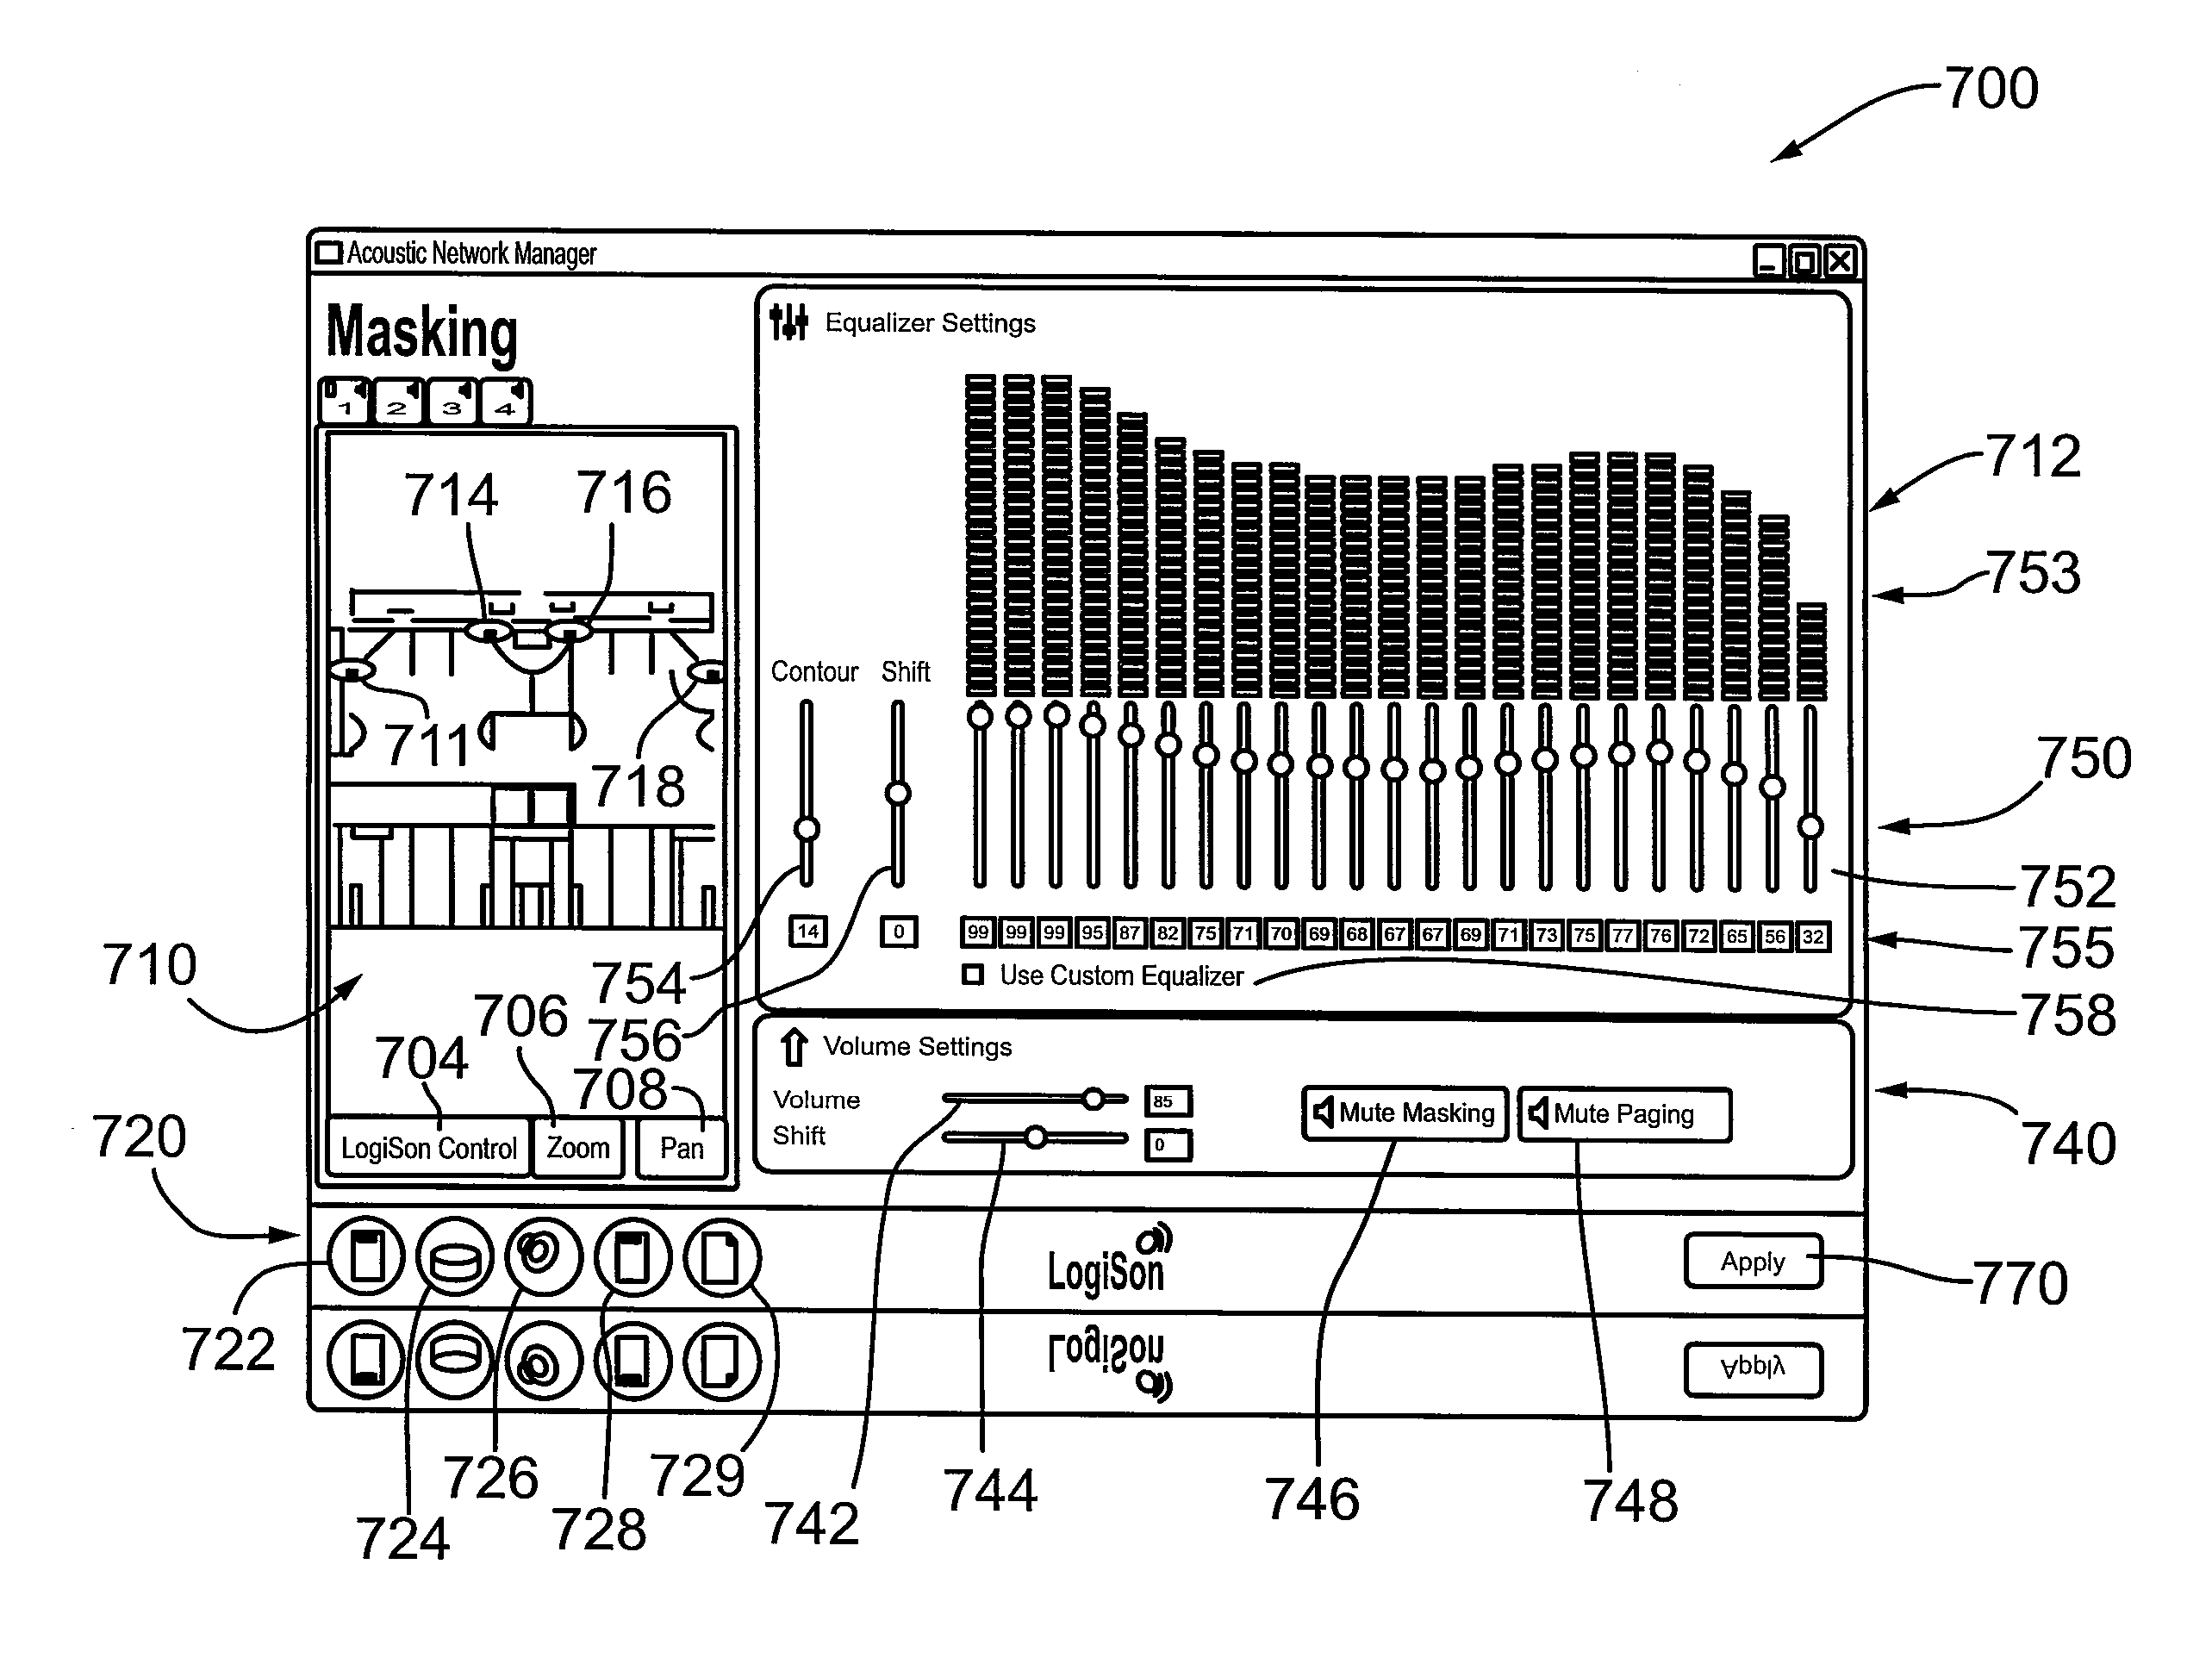 System and method for monitoring/controlling a sound masking system from an electronic floorplan